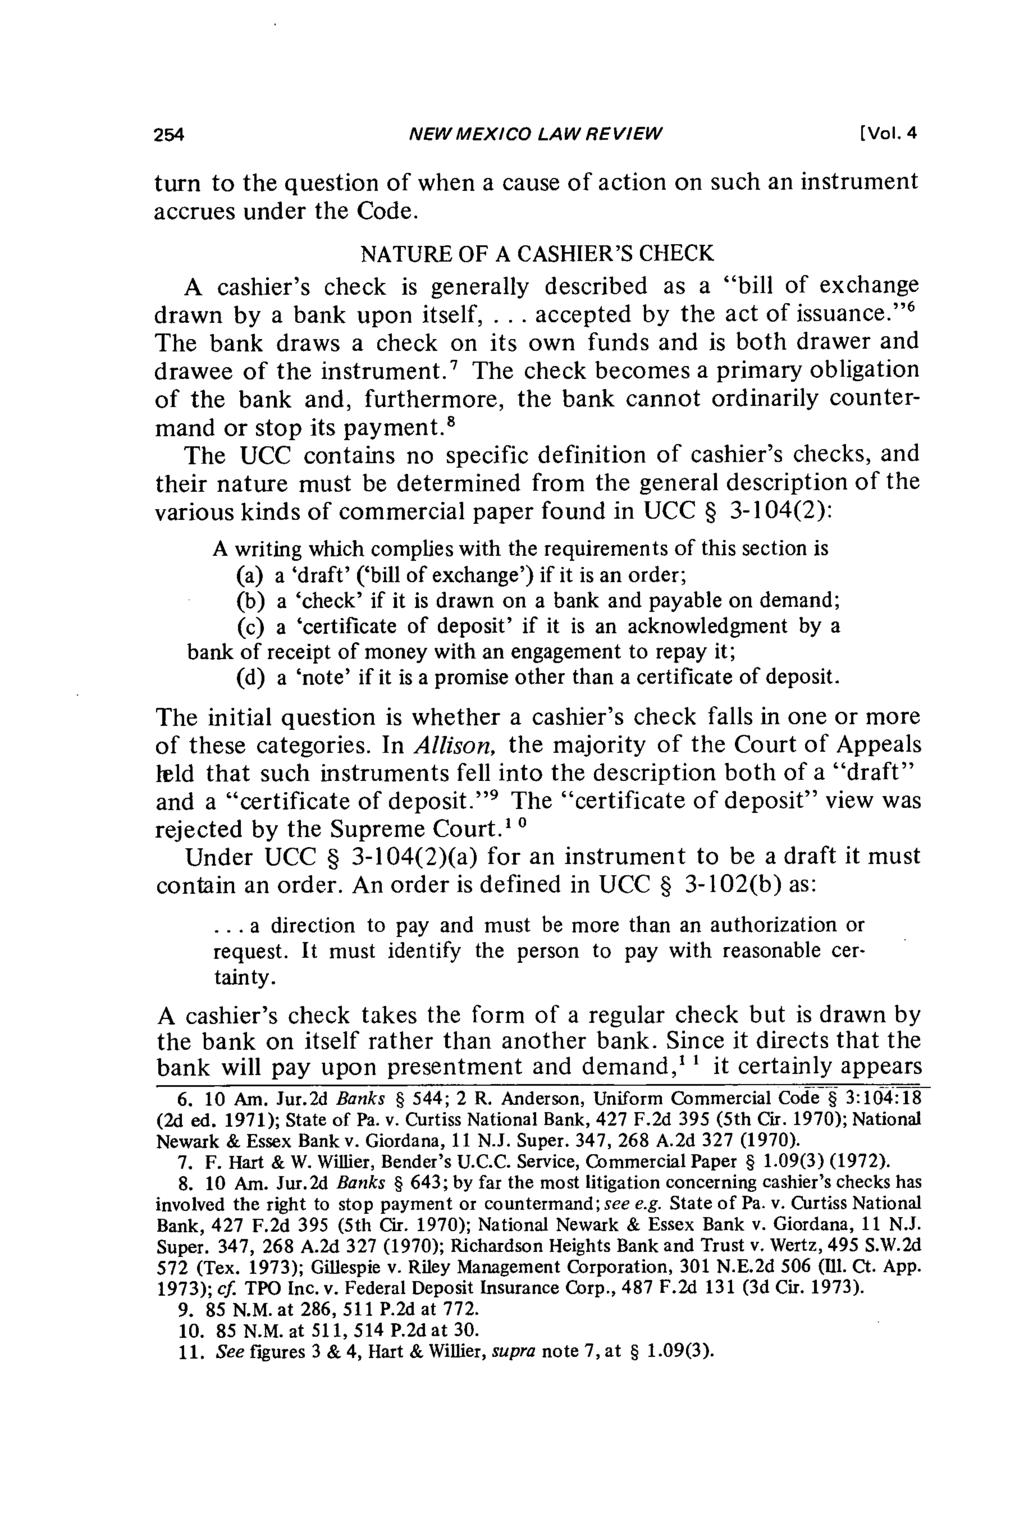 NEW MEXICO LAW REVIEW [Vol. 4 turn to the question of when a cause of action on such an instrument accrues under the Code.